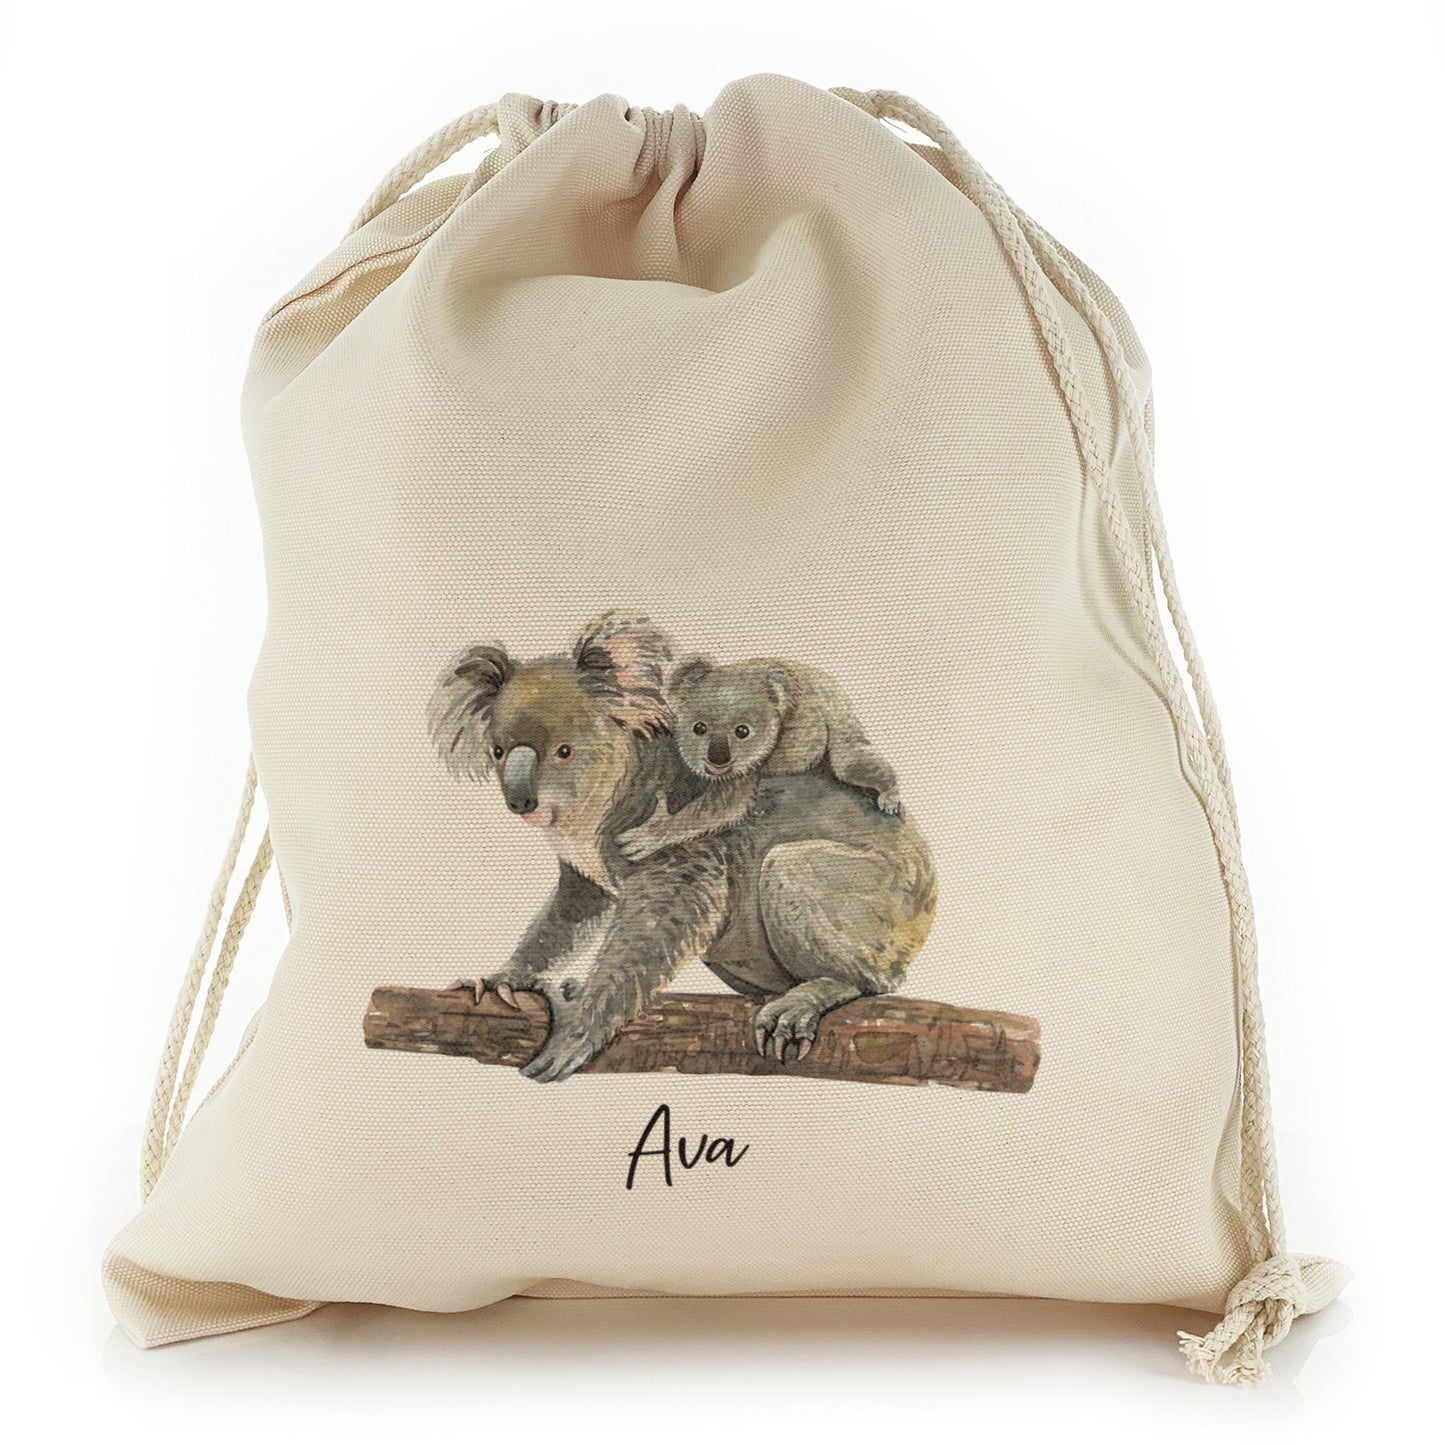 Personalised Canvas Sack with Welcoming Text and Embracing Mum and Baby Koalas